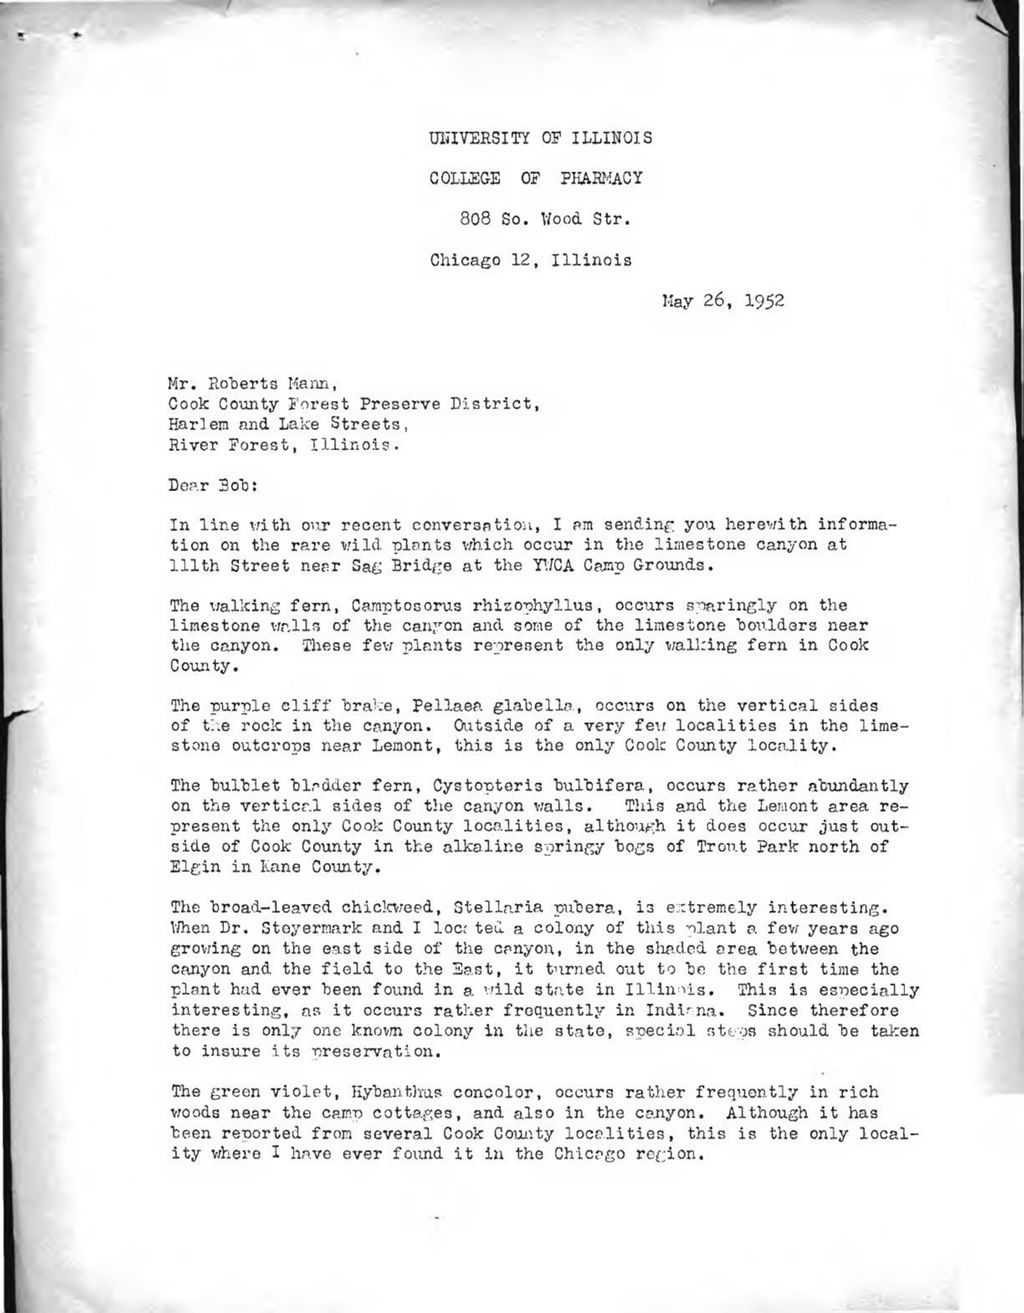 Letter from Floyd A. Swink, University of Illinois, to Roberts Mann, 1952